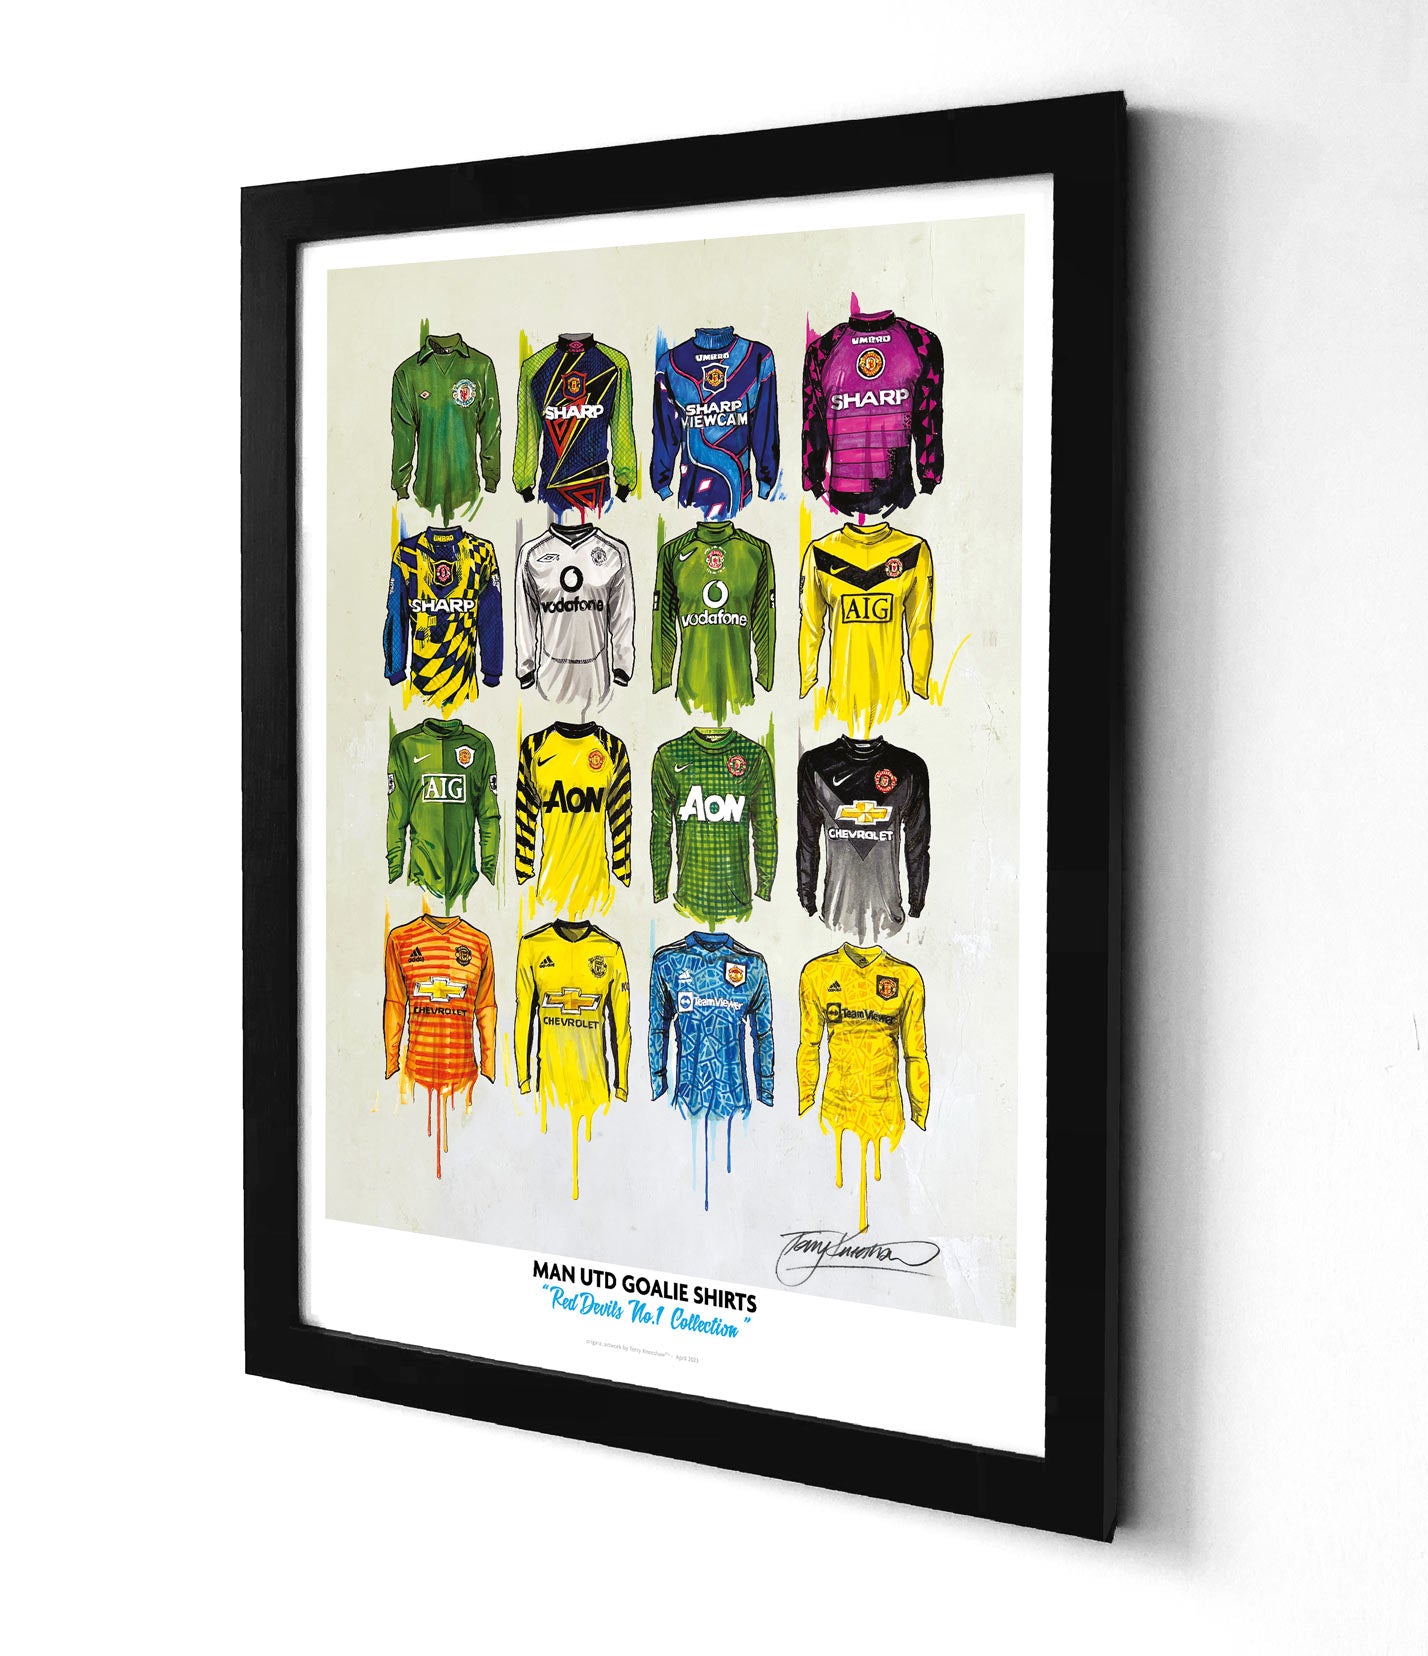 Terry Kneeshaw's limited edition A2 print showcases his artwork featuring 16 different Manchester United Football Club Goal Keeper jerseys from various eras.